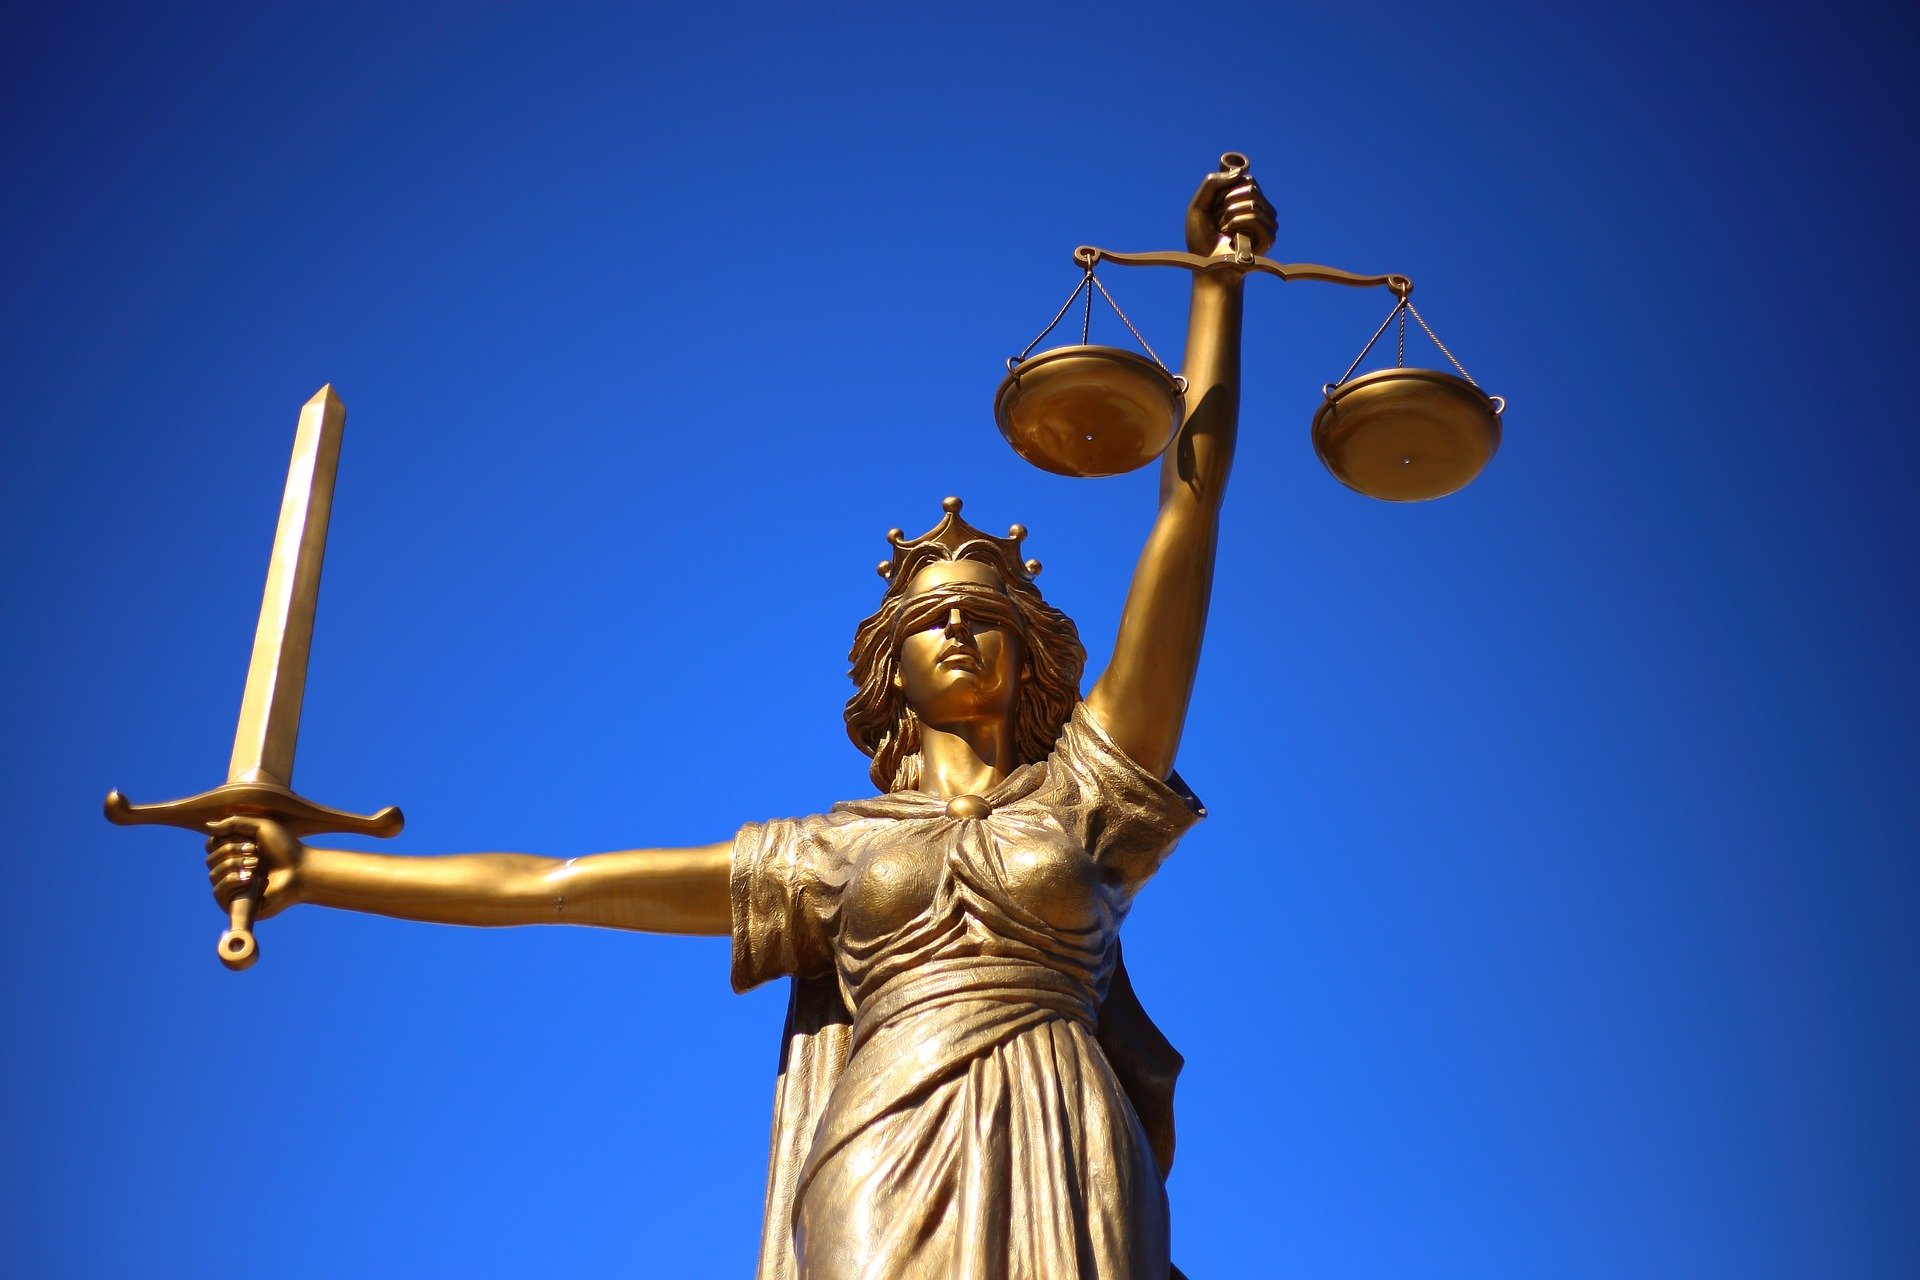 Scales of Justice; Image provided by Pixabay